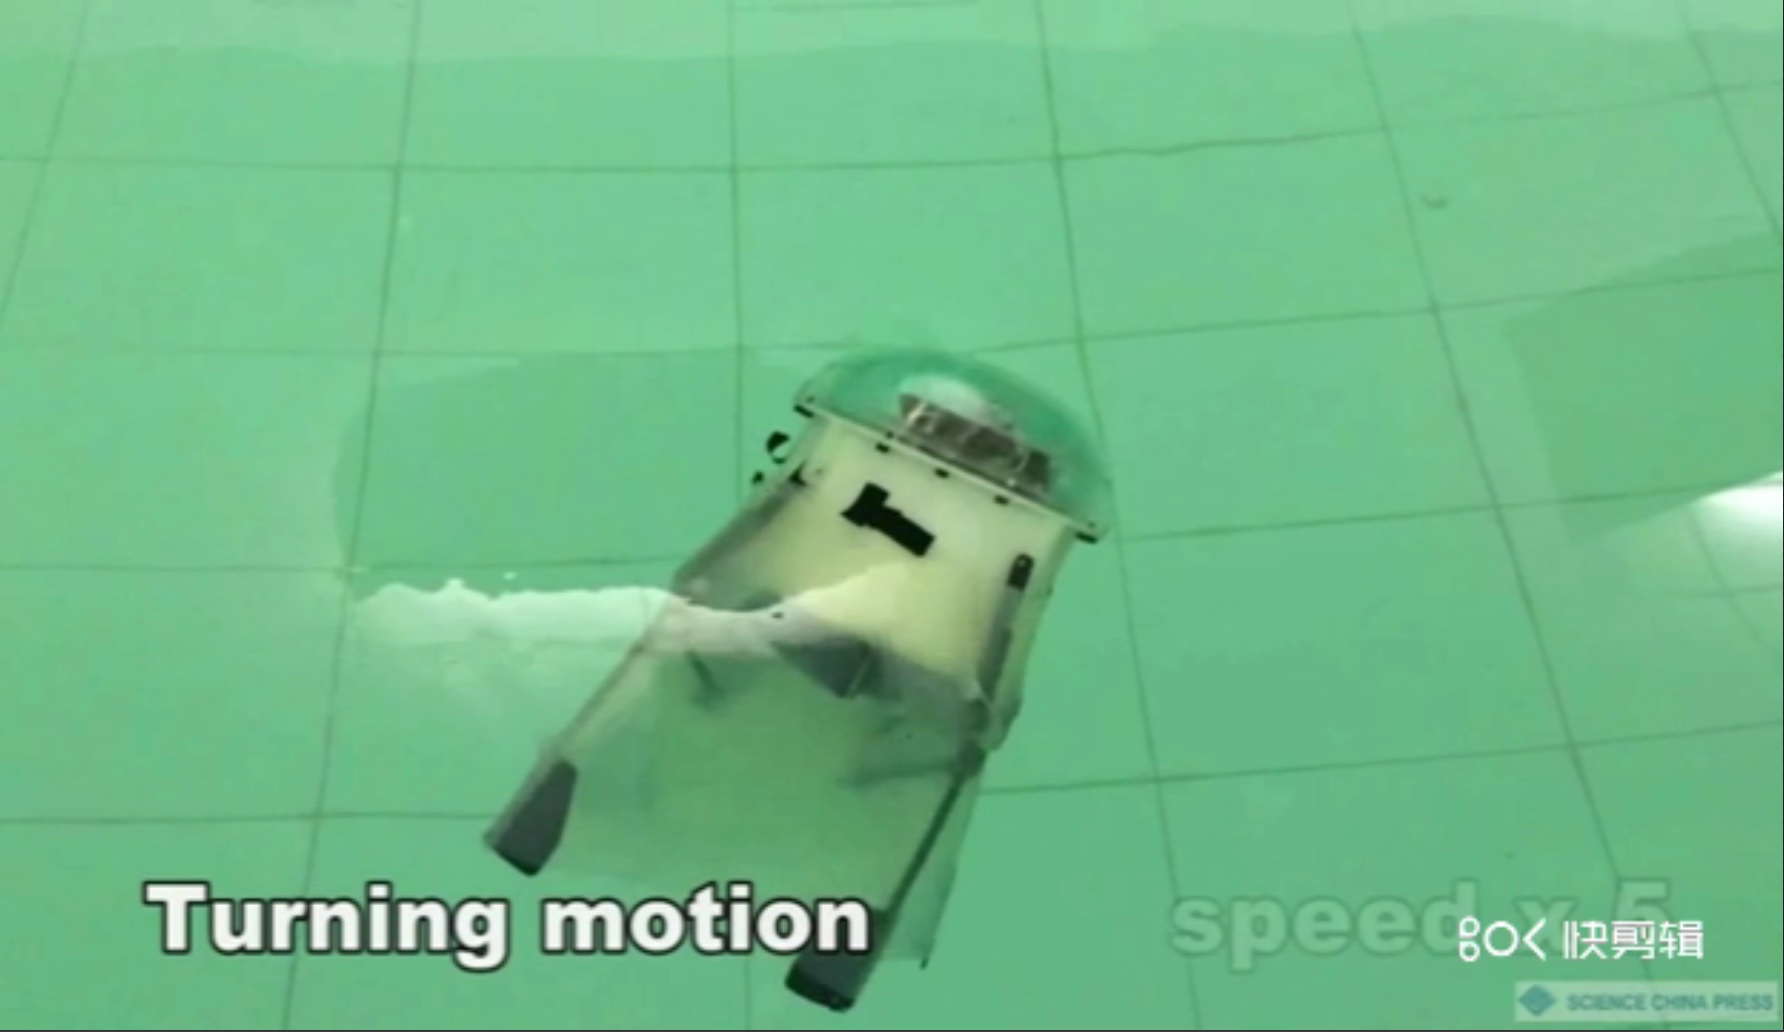 A Novel Robotic Jellyfish Able to Perform 3D Jet Propulsion and Maneuvers